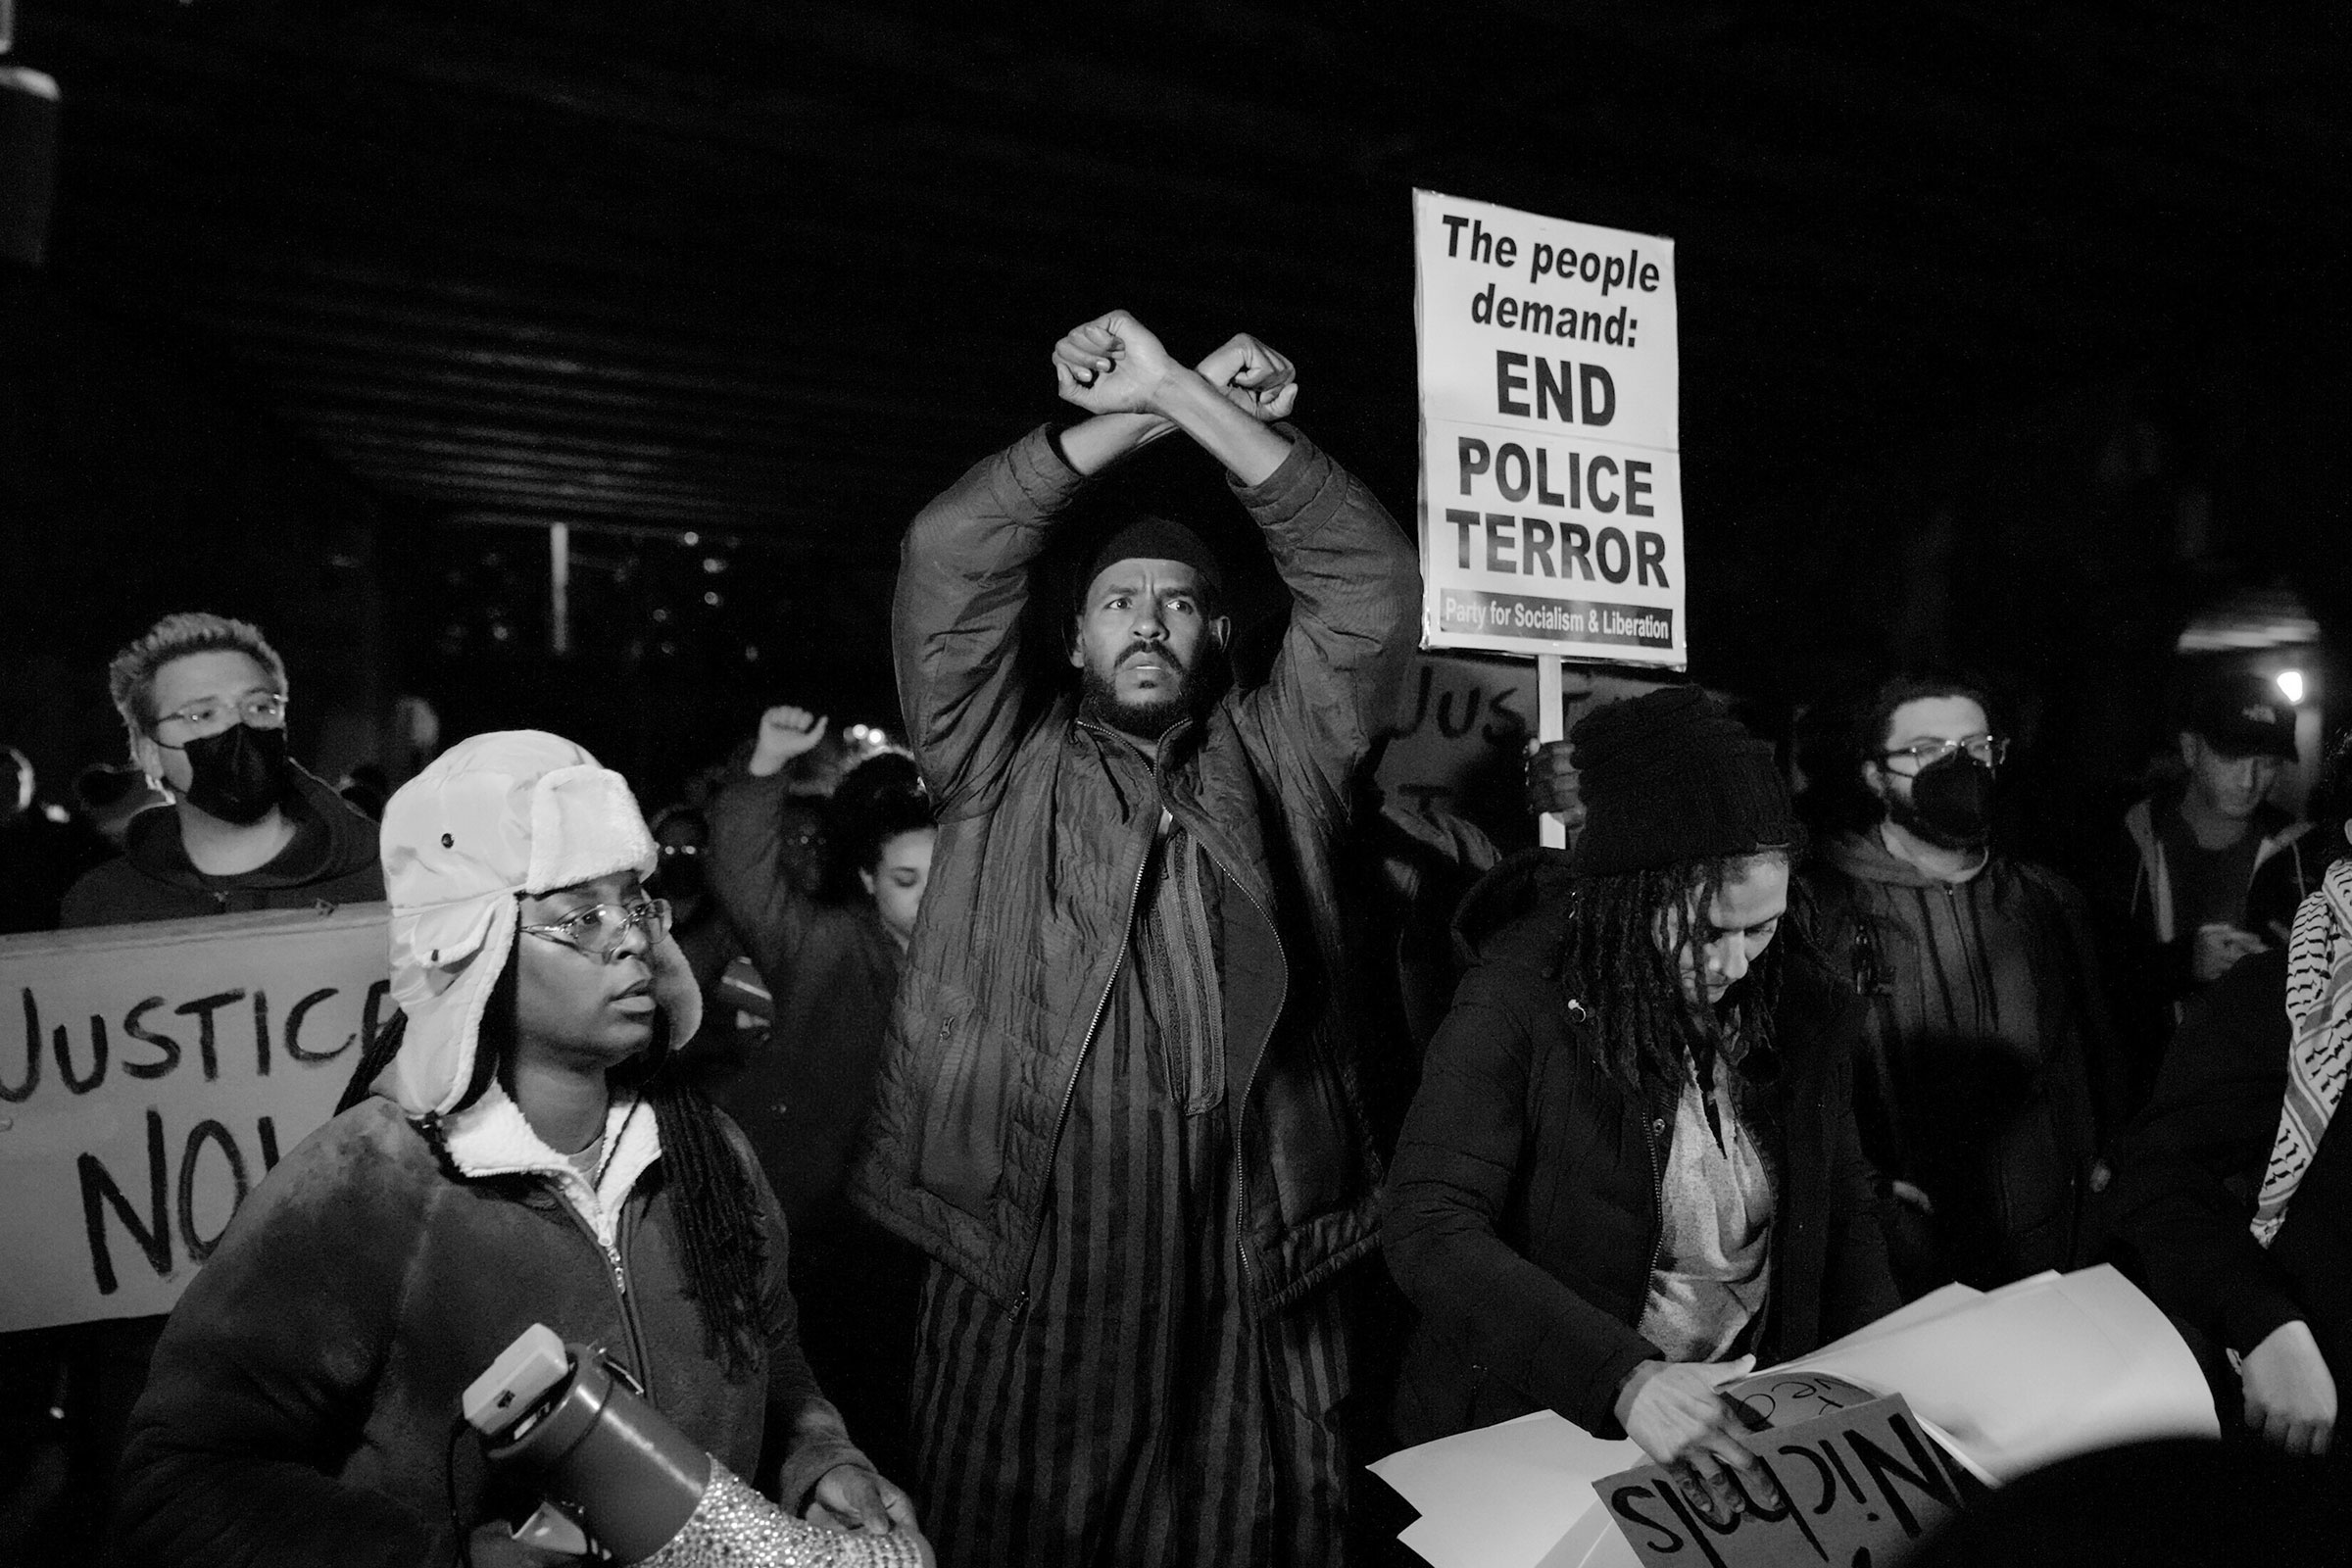 Protesters block traffic along the Arkansas-Memphis bridge in Memphis, Tenn. on Jan. 27, after the city of Memphis released video that shows several police officers beating Tyre Nichols, a 29-year-old Black man who later died.